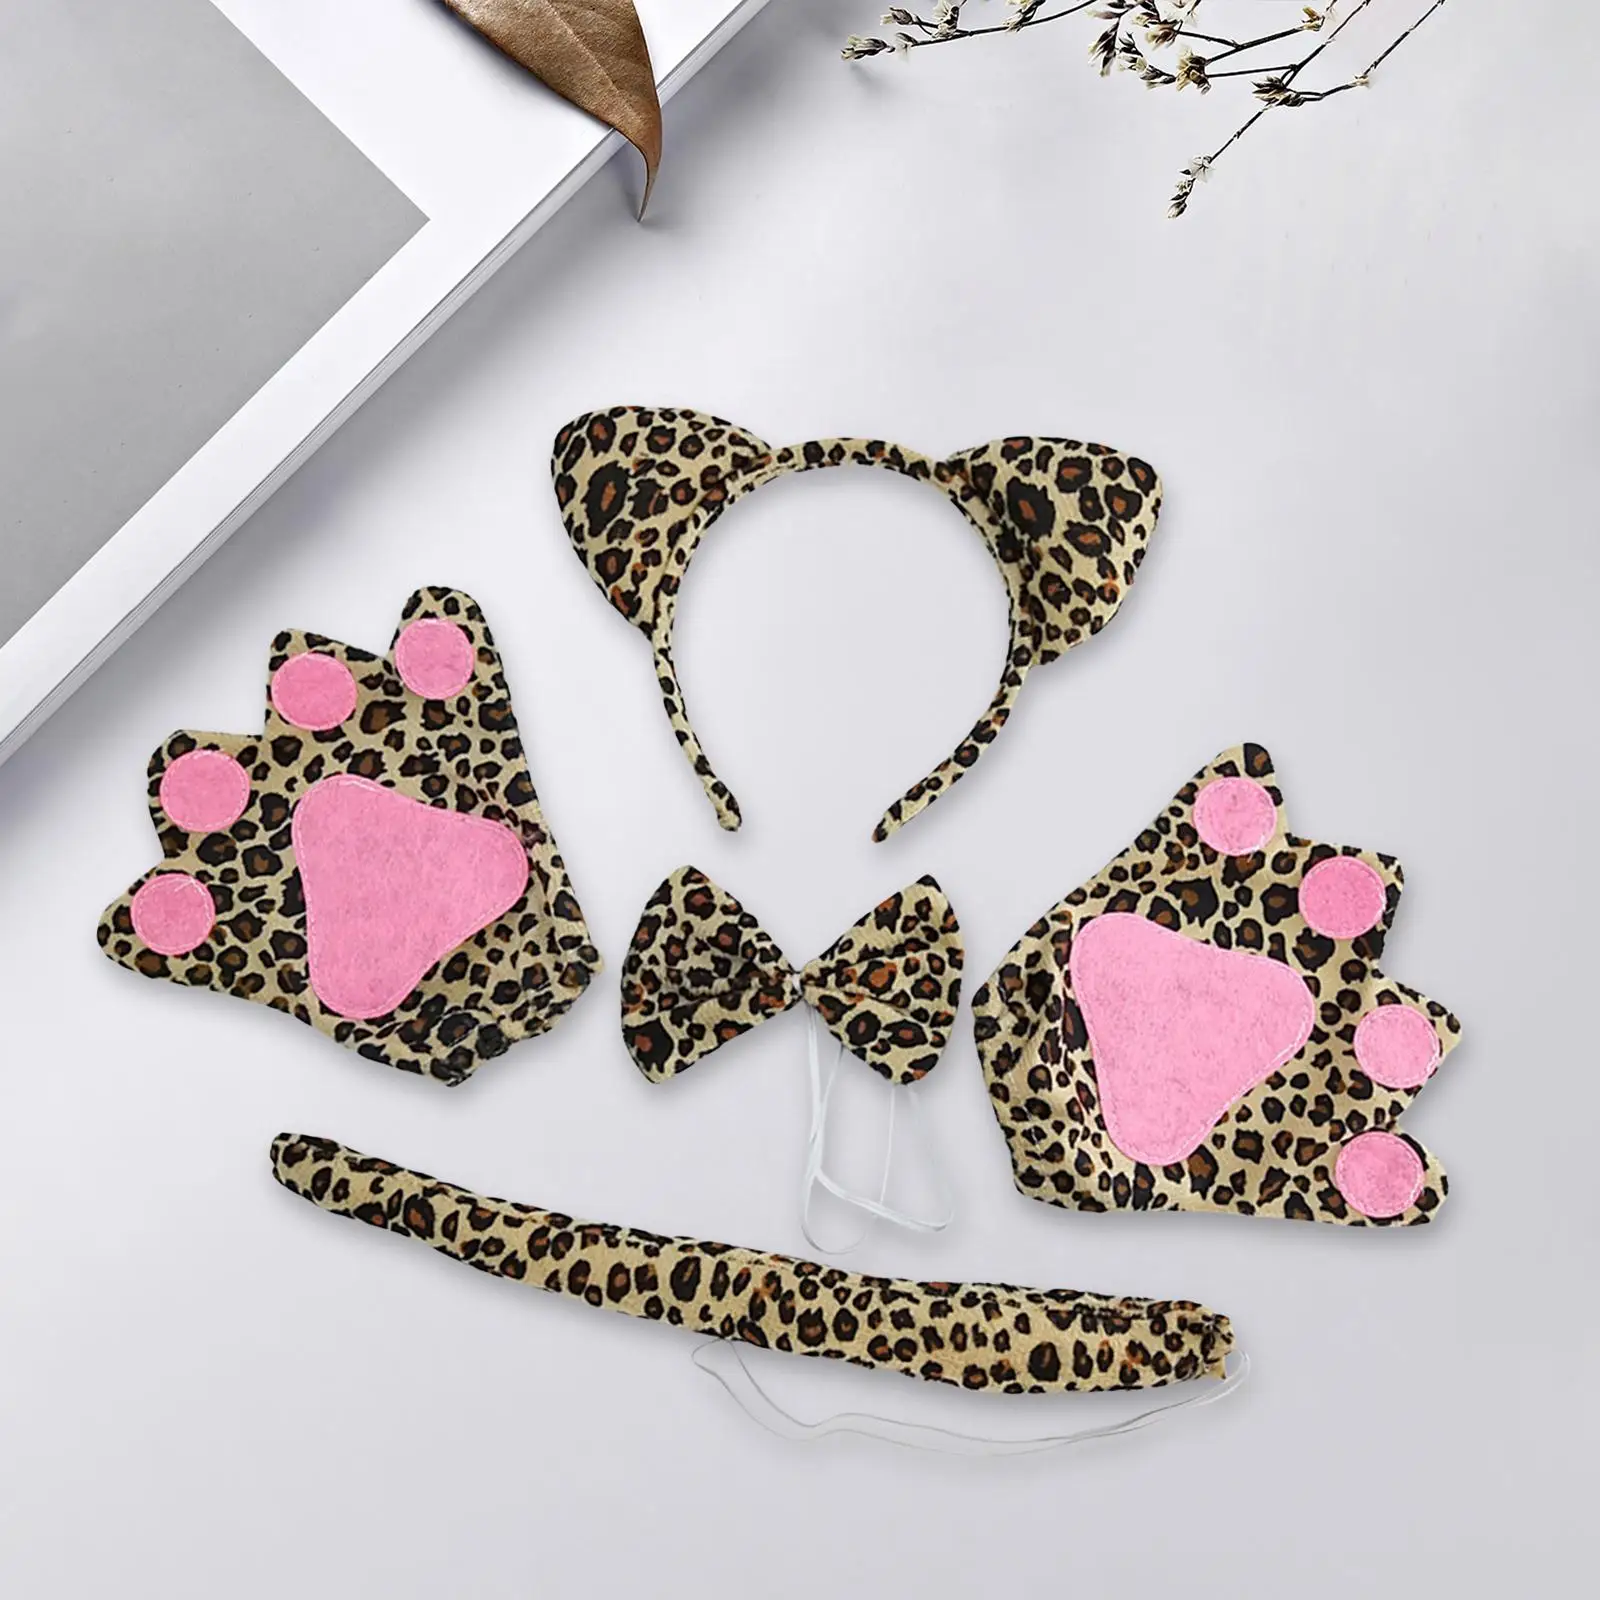 4x Leopard Costume Set Gloves Hair Accessory Ears Tail Bow Tie Animal Dress Set for Adults Performance Carnival Party Decoration